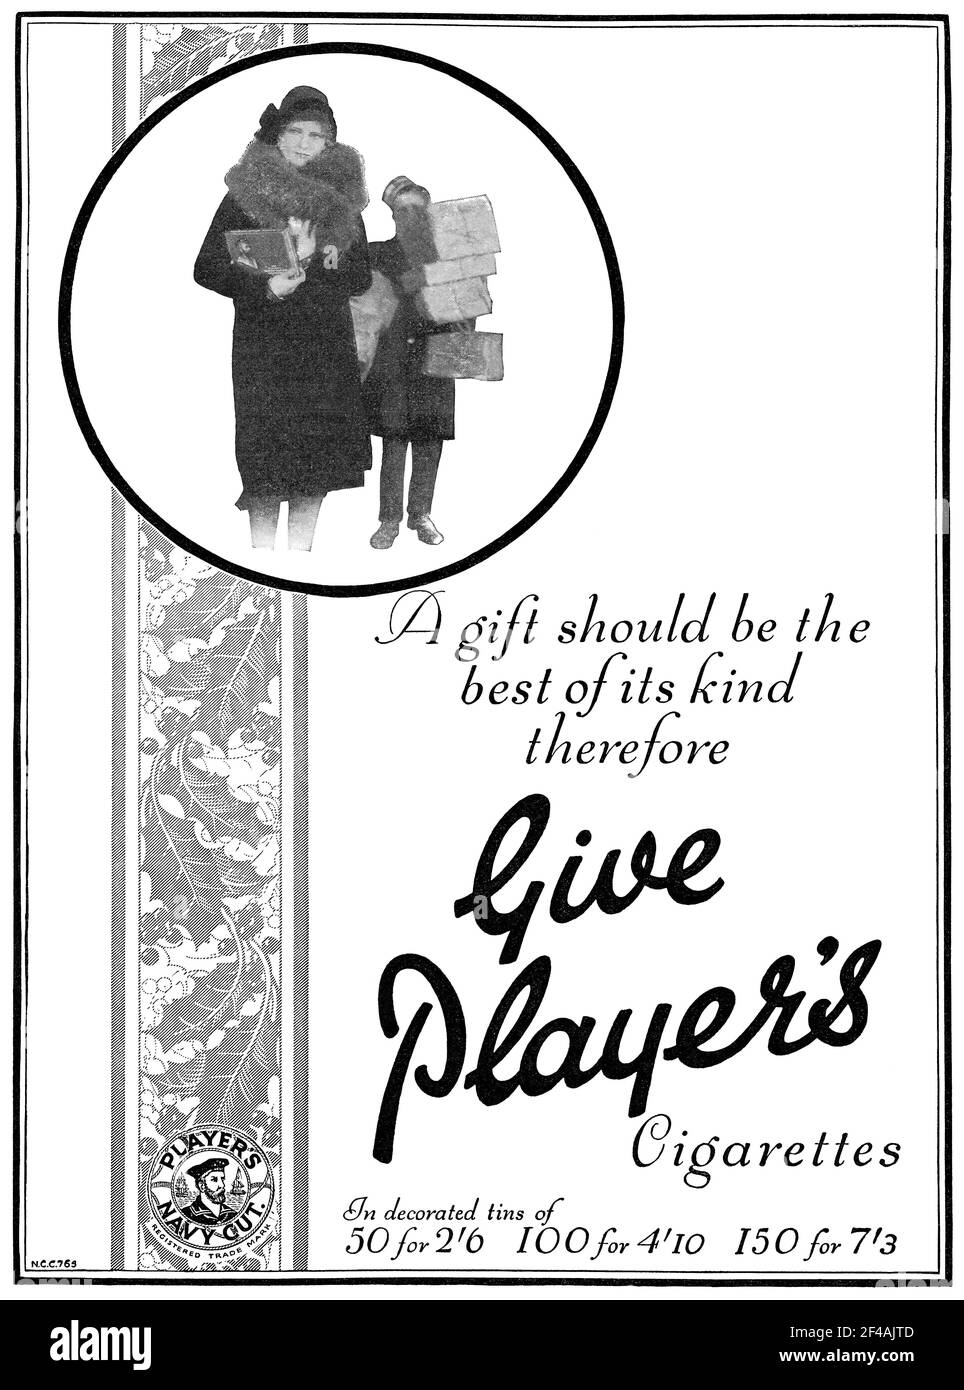 1930 British advertisement for Player's cigarettes. Stock Photo